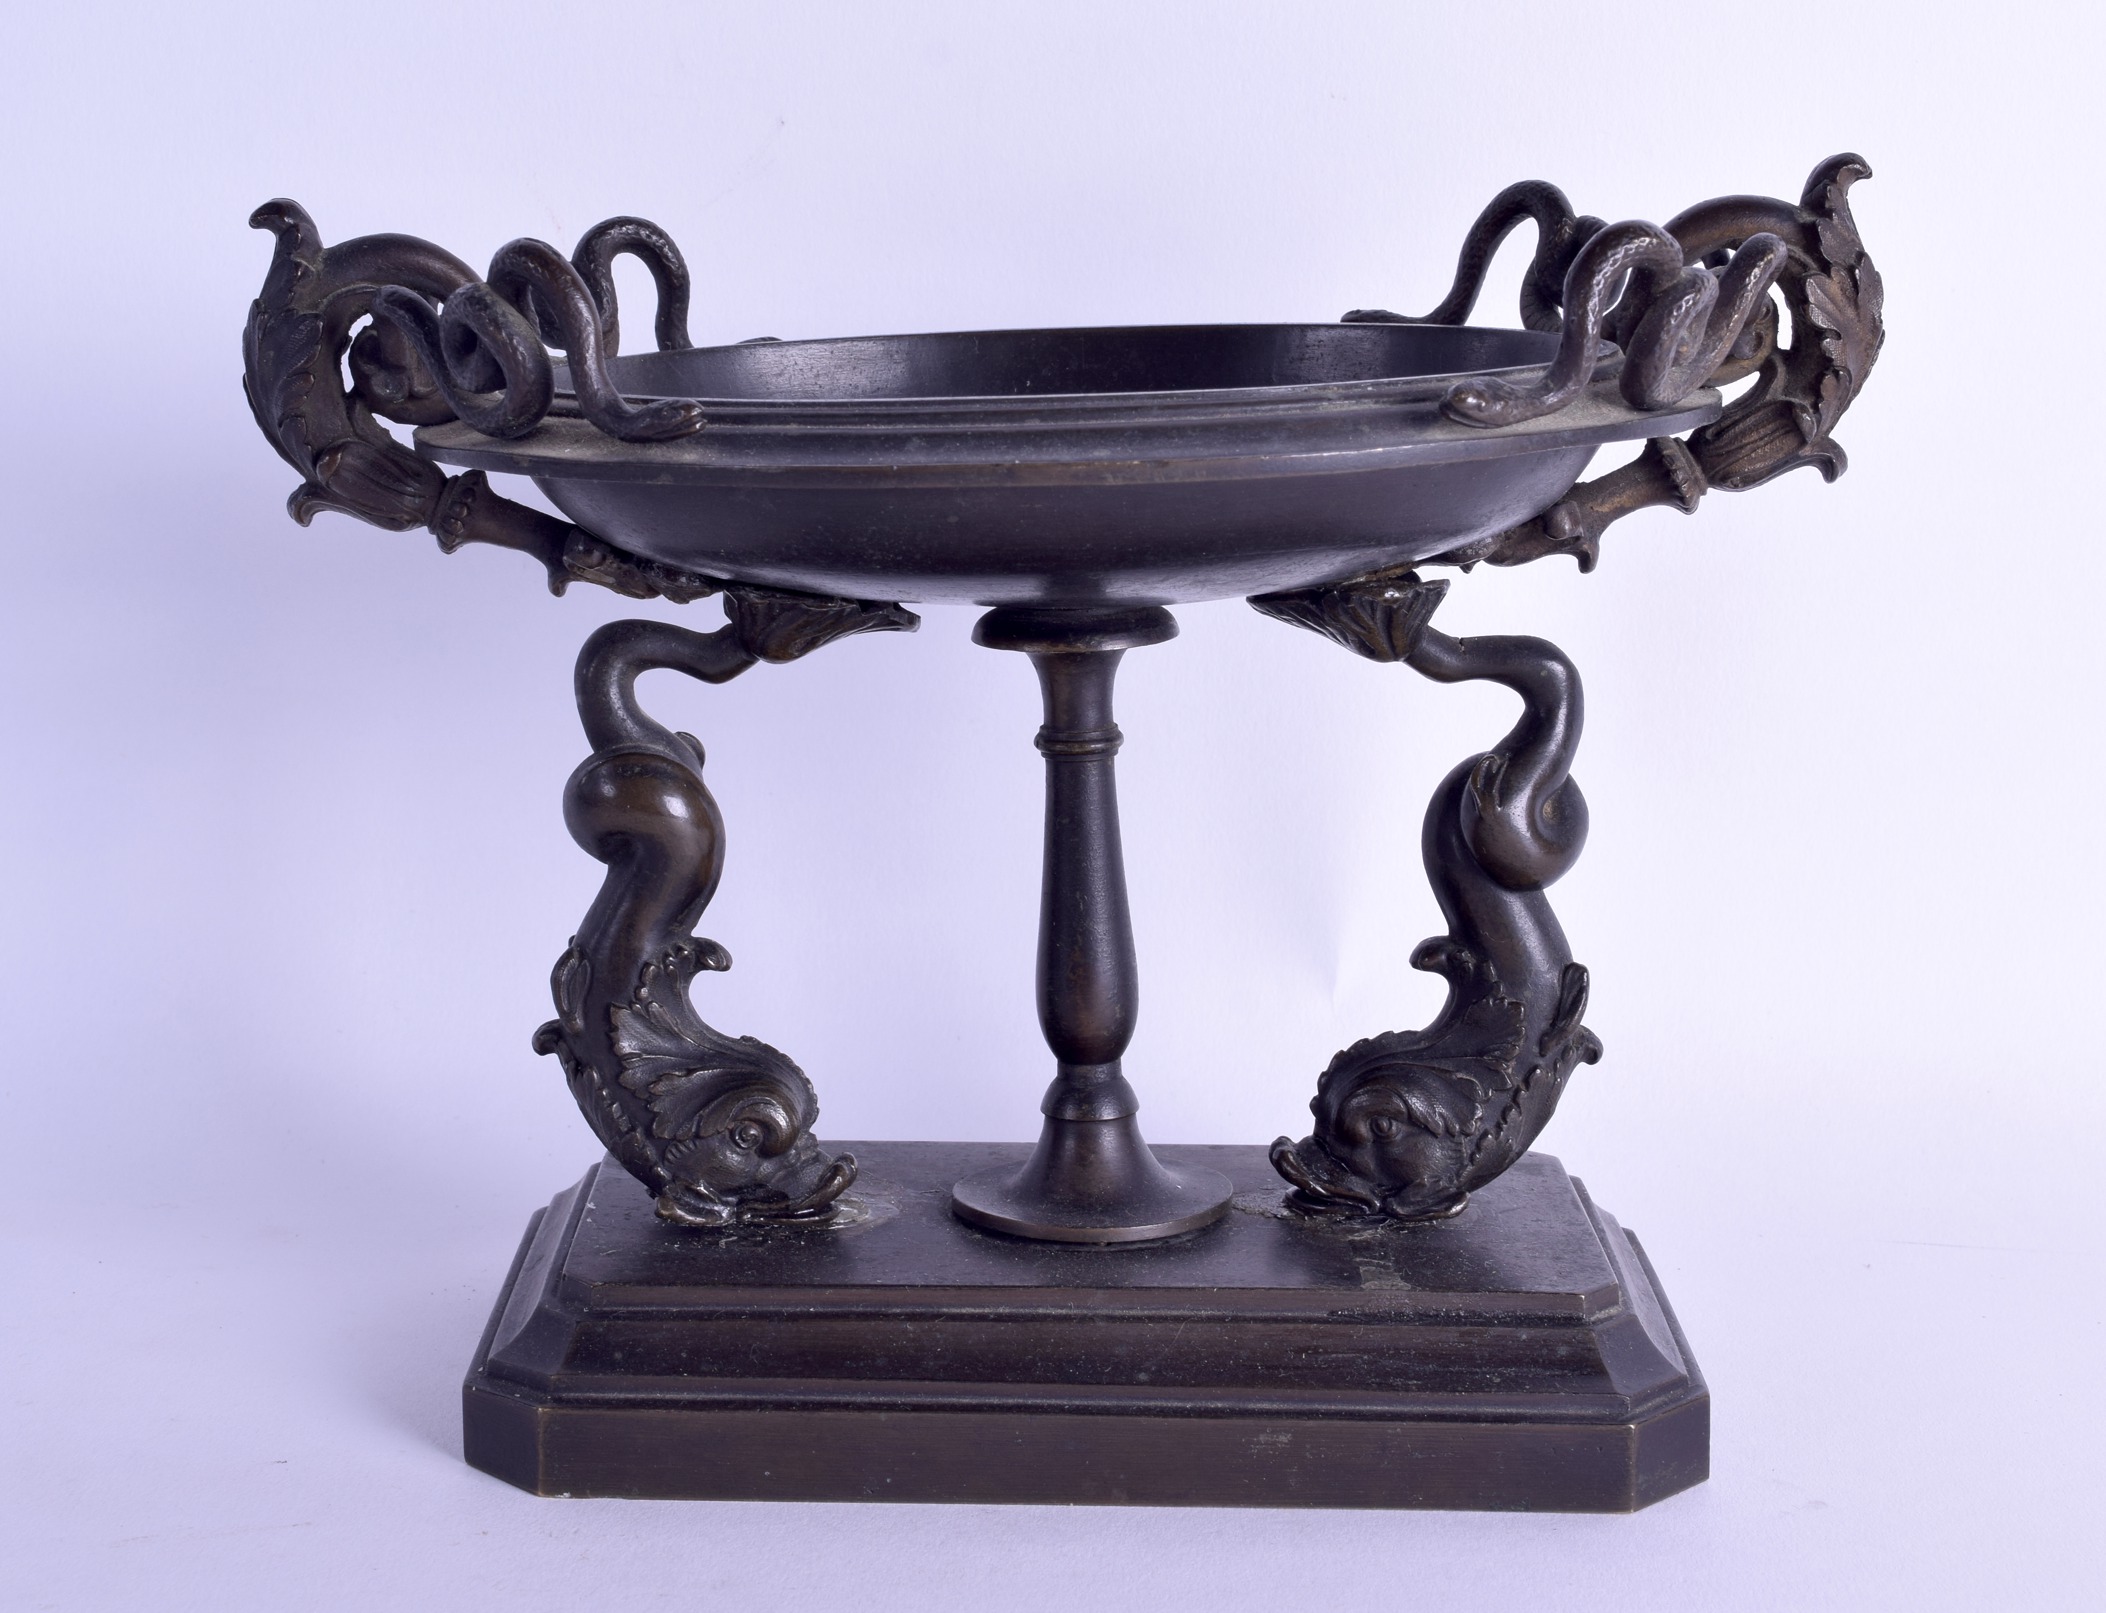 A 19TH CENTURY ITALIAN GRAND TOUR BRONZE FOUNTAIN modelled with scrolling serpents and fish - Image 2 of 2